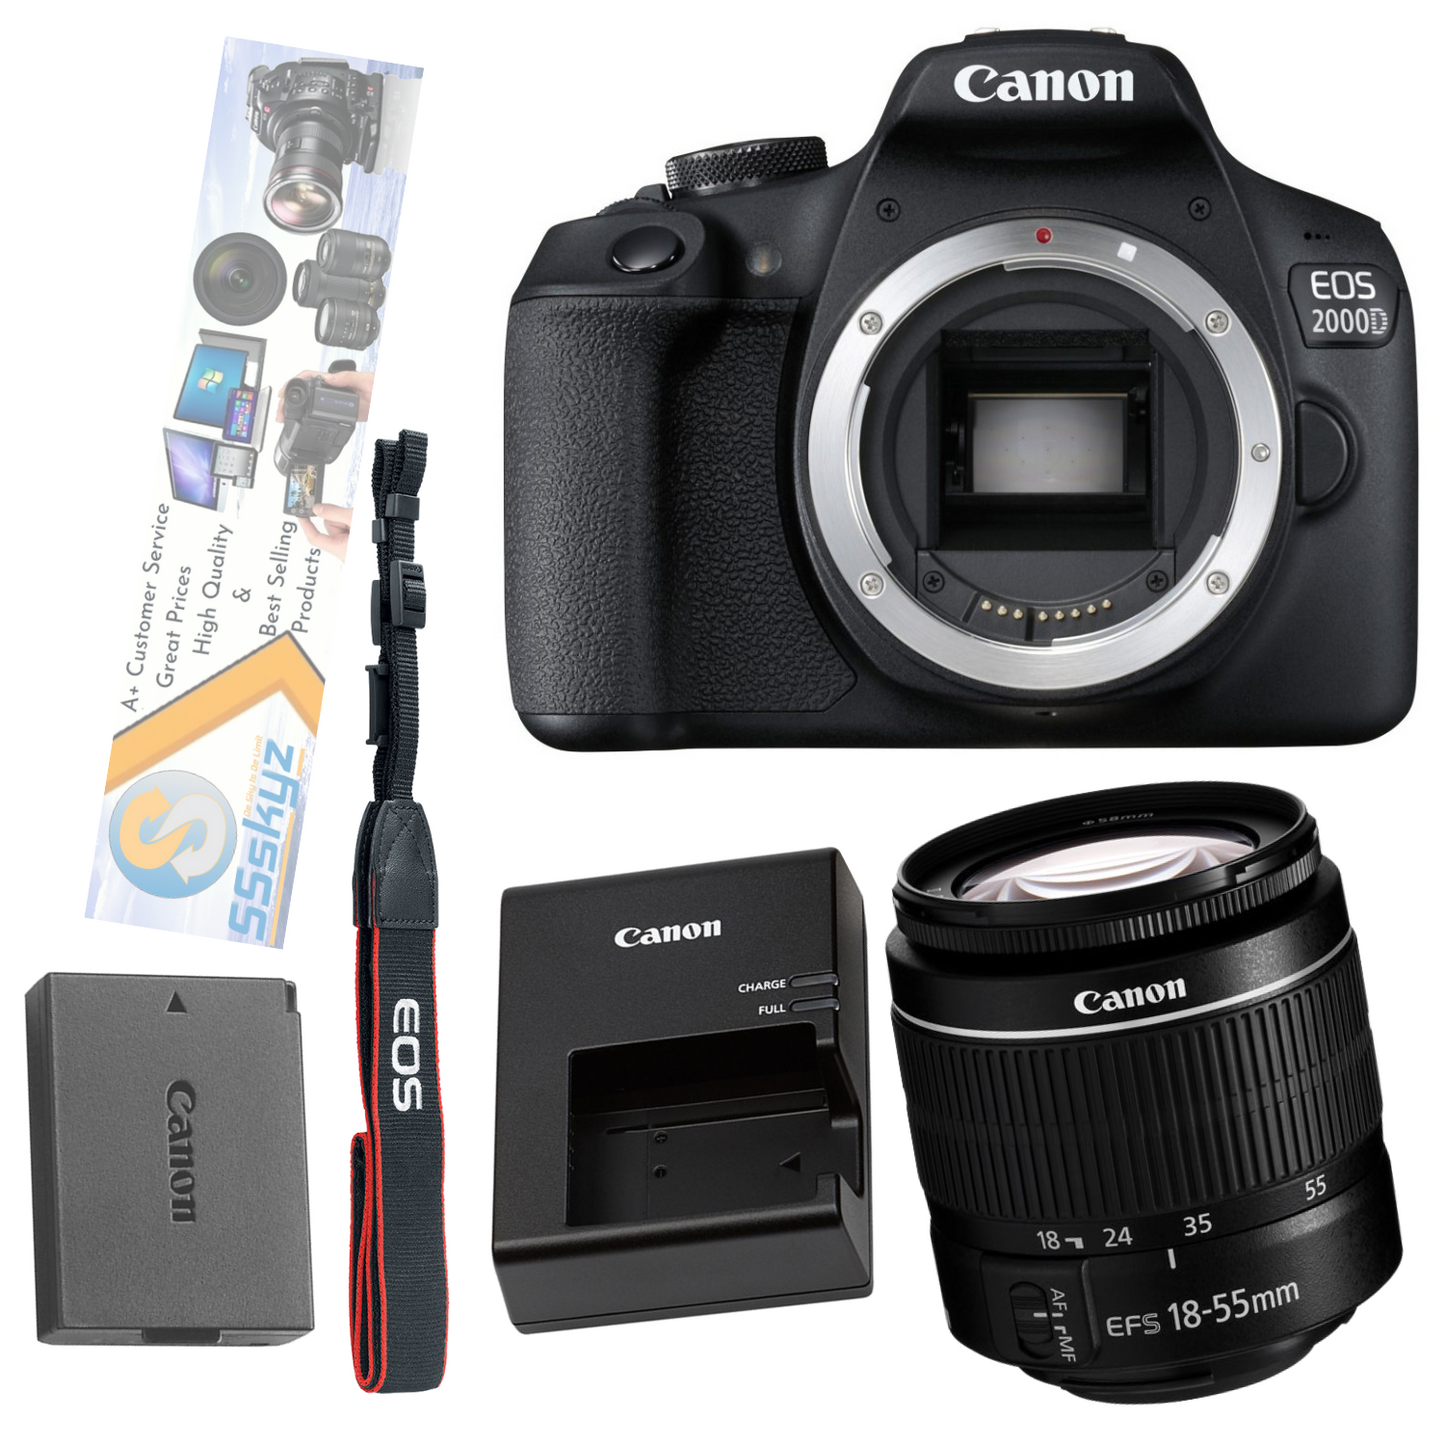 Canon Eos Rebel 2000D / T7 24.1 Mp Digital Slr Camera with 18-55mm DC III Lens